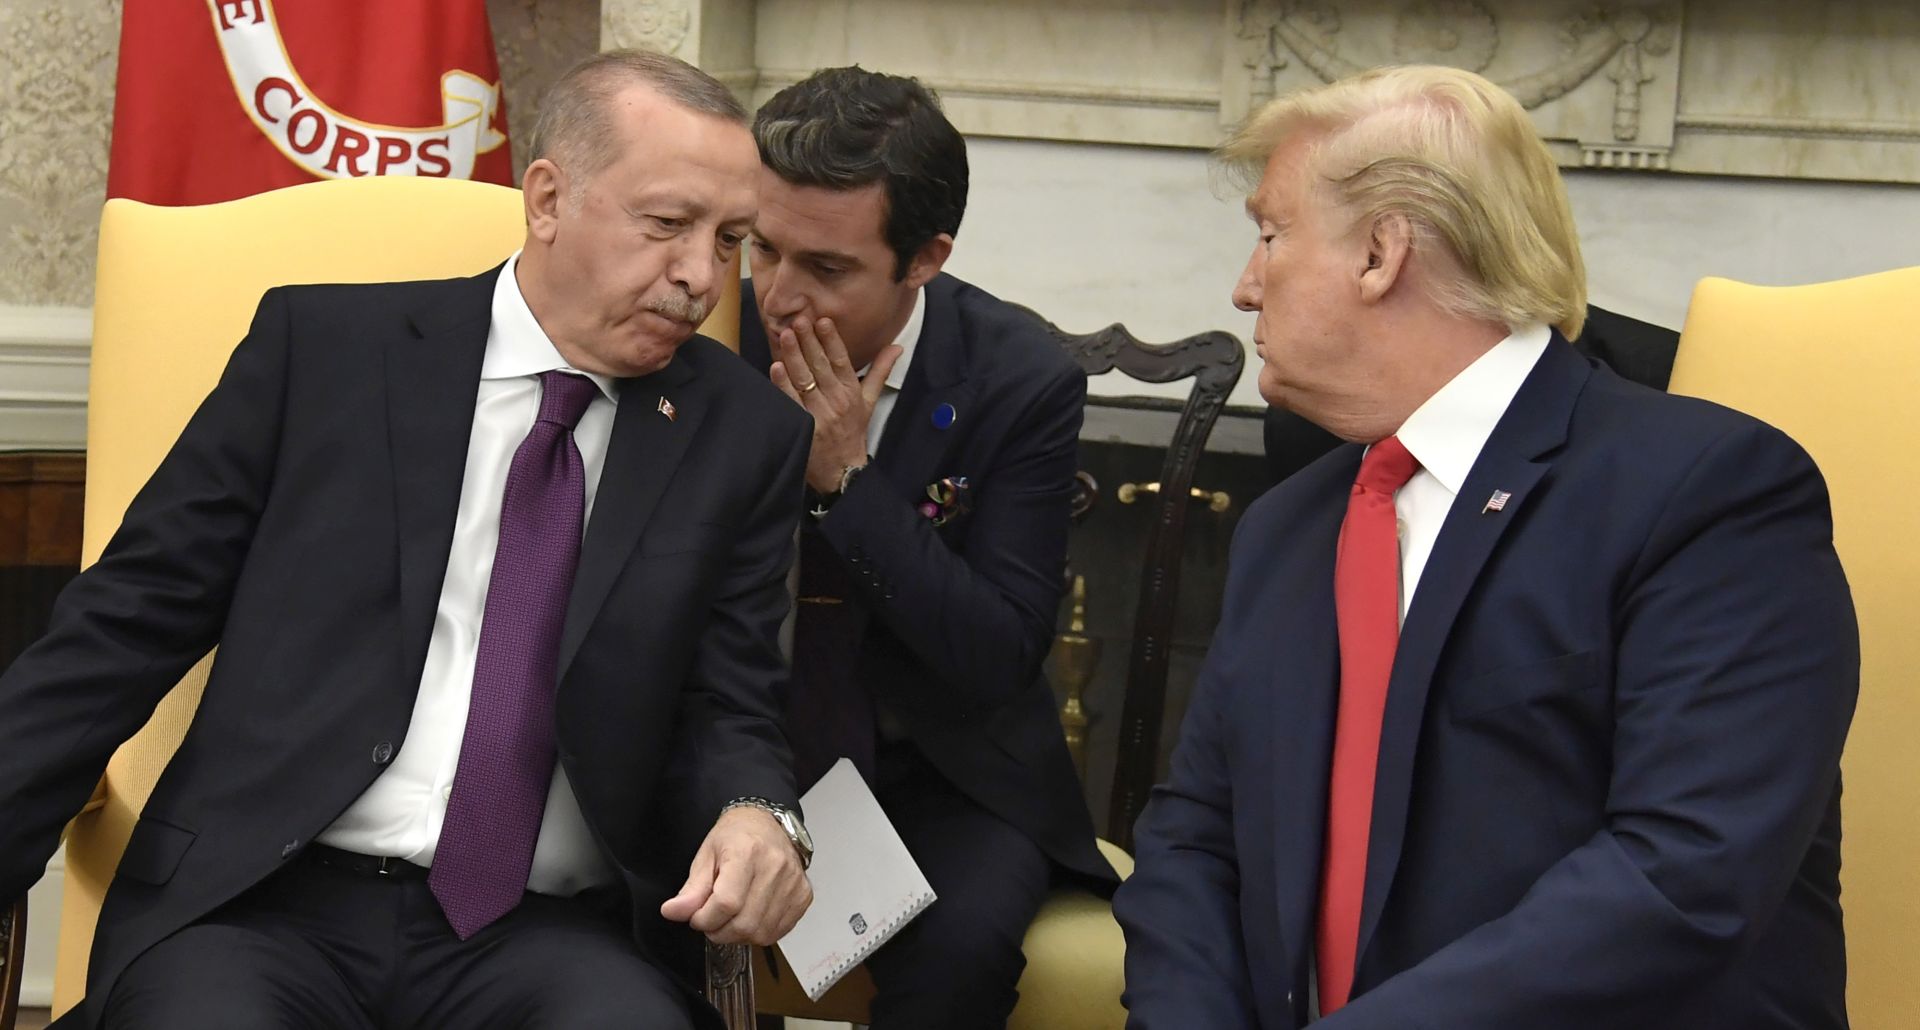 epa07993655 President Donald Trump (R) leans in as a translator speaks to Turkish President Recep Tayyip Erdogan in the Oval Office of the White House, Wednesday, November 13, 2019, Washington, DC, USA, 13 November 2019. The leaders are expected to discuss security issues, trade, NATO and Turkey's incurson into Syria.  EPA/MIKE THEILER / POOL